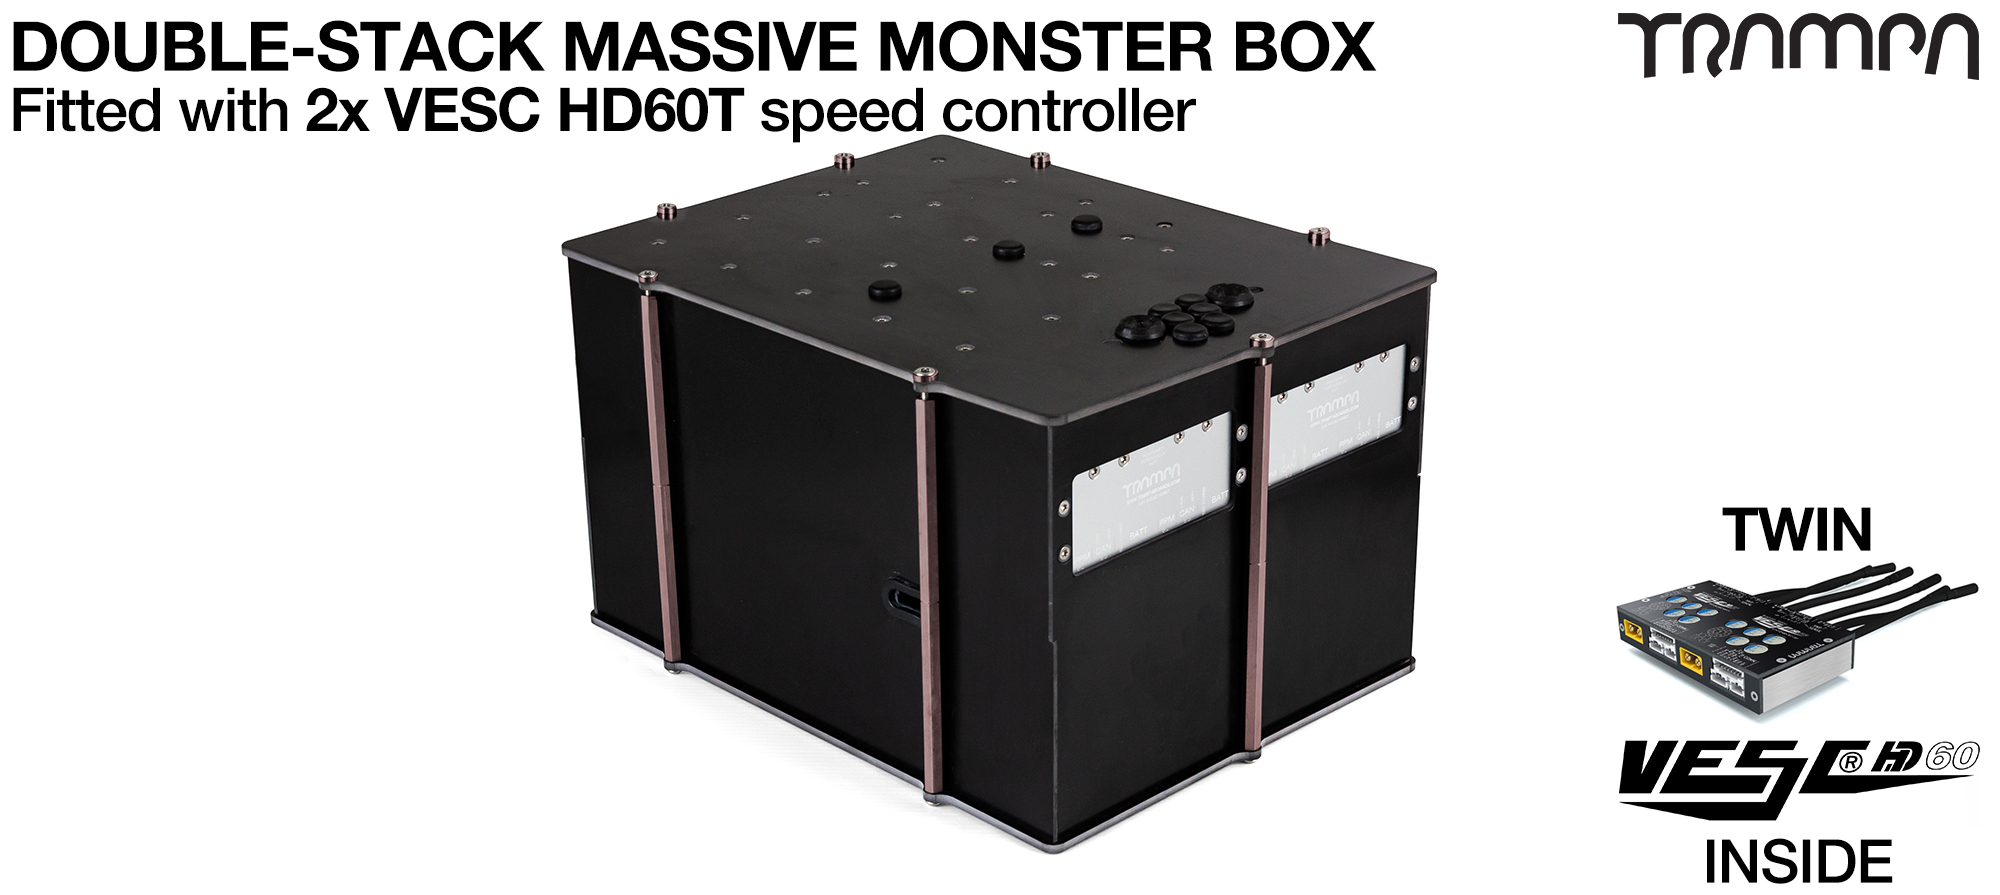 4WD DOUBLE STACK MASSIVE MONSTER Box with 2x VESC HD-60Twin Fitted (4WD)